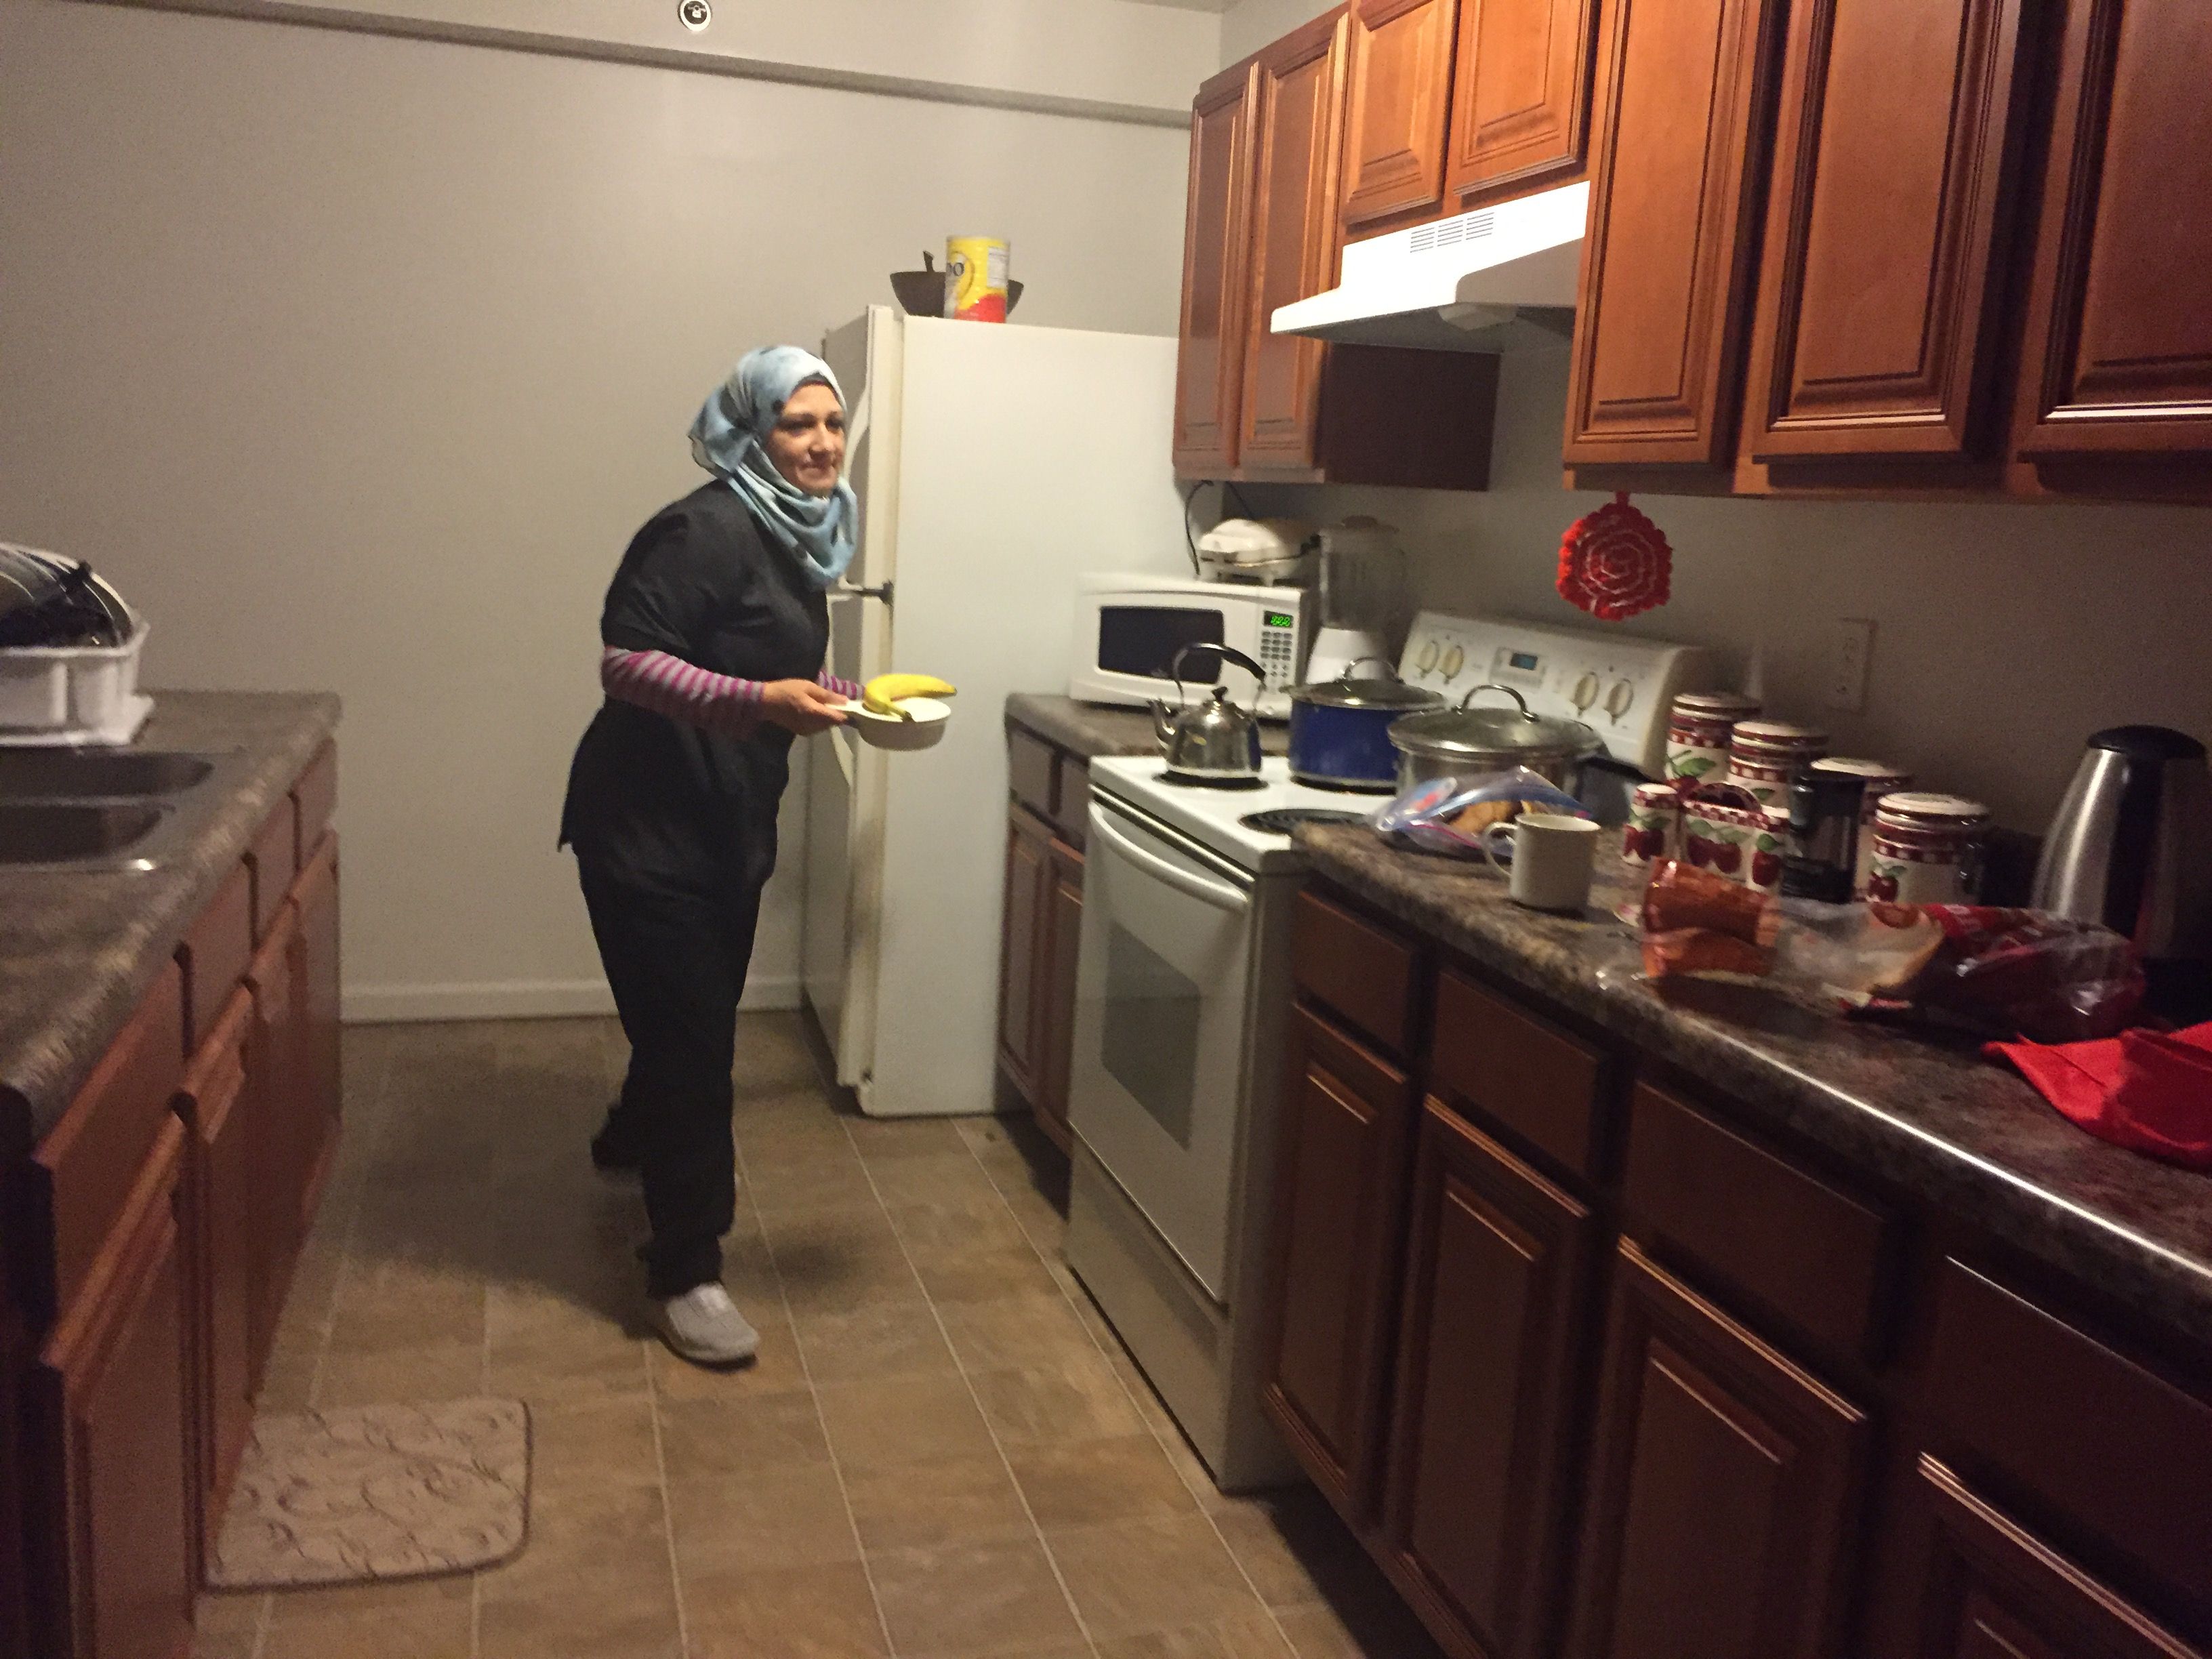 When Ghazweh gets a job cleaning hotel rooms, she wakes up before 5 to commute to go to work and makes breakfast for the children.